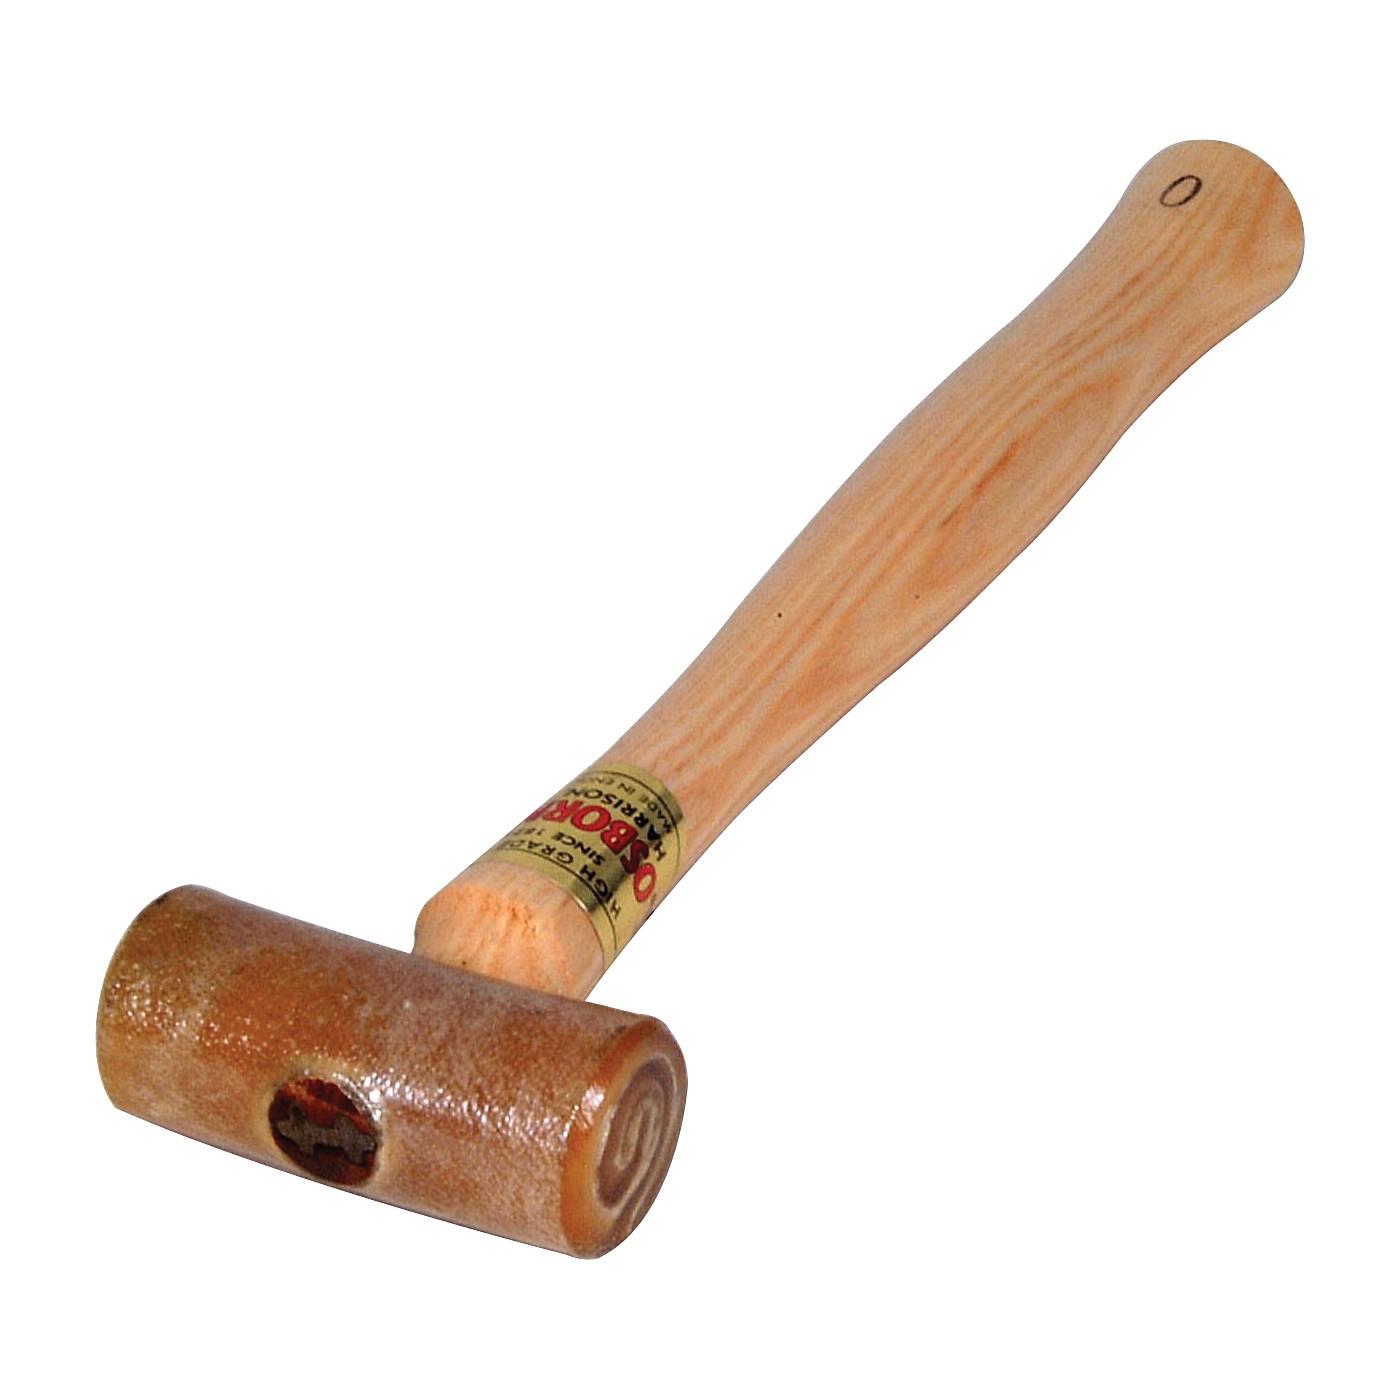 Allied Music Supply Rawhide Mallet thumbnail